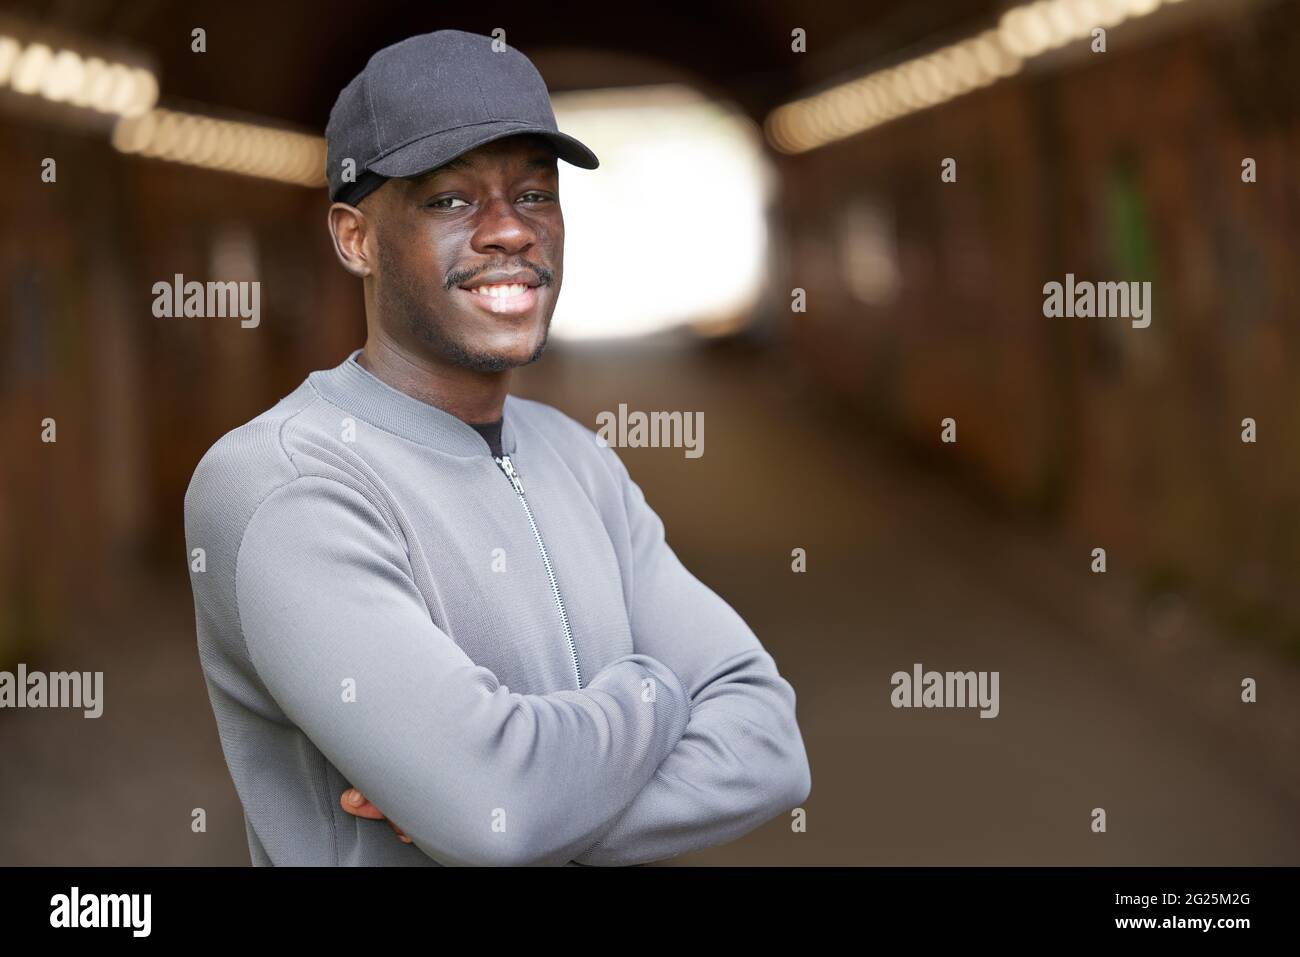 Portrait Of Smiling Young Man Wearing Baseball Cap Standing In Tunnel In In Urban Setting Stock Photo